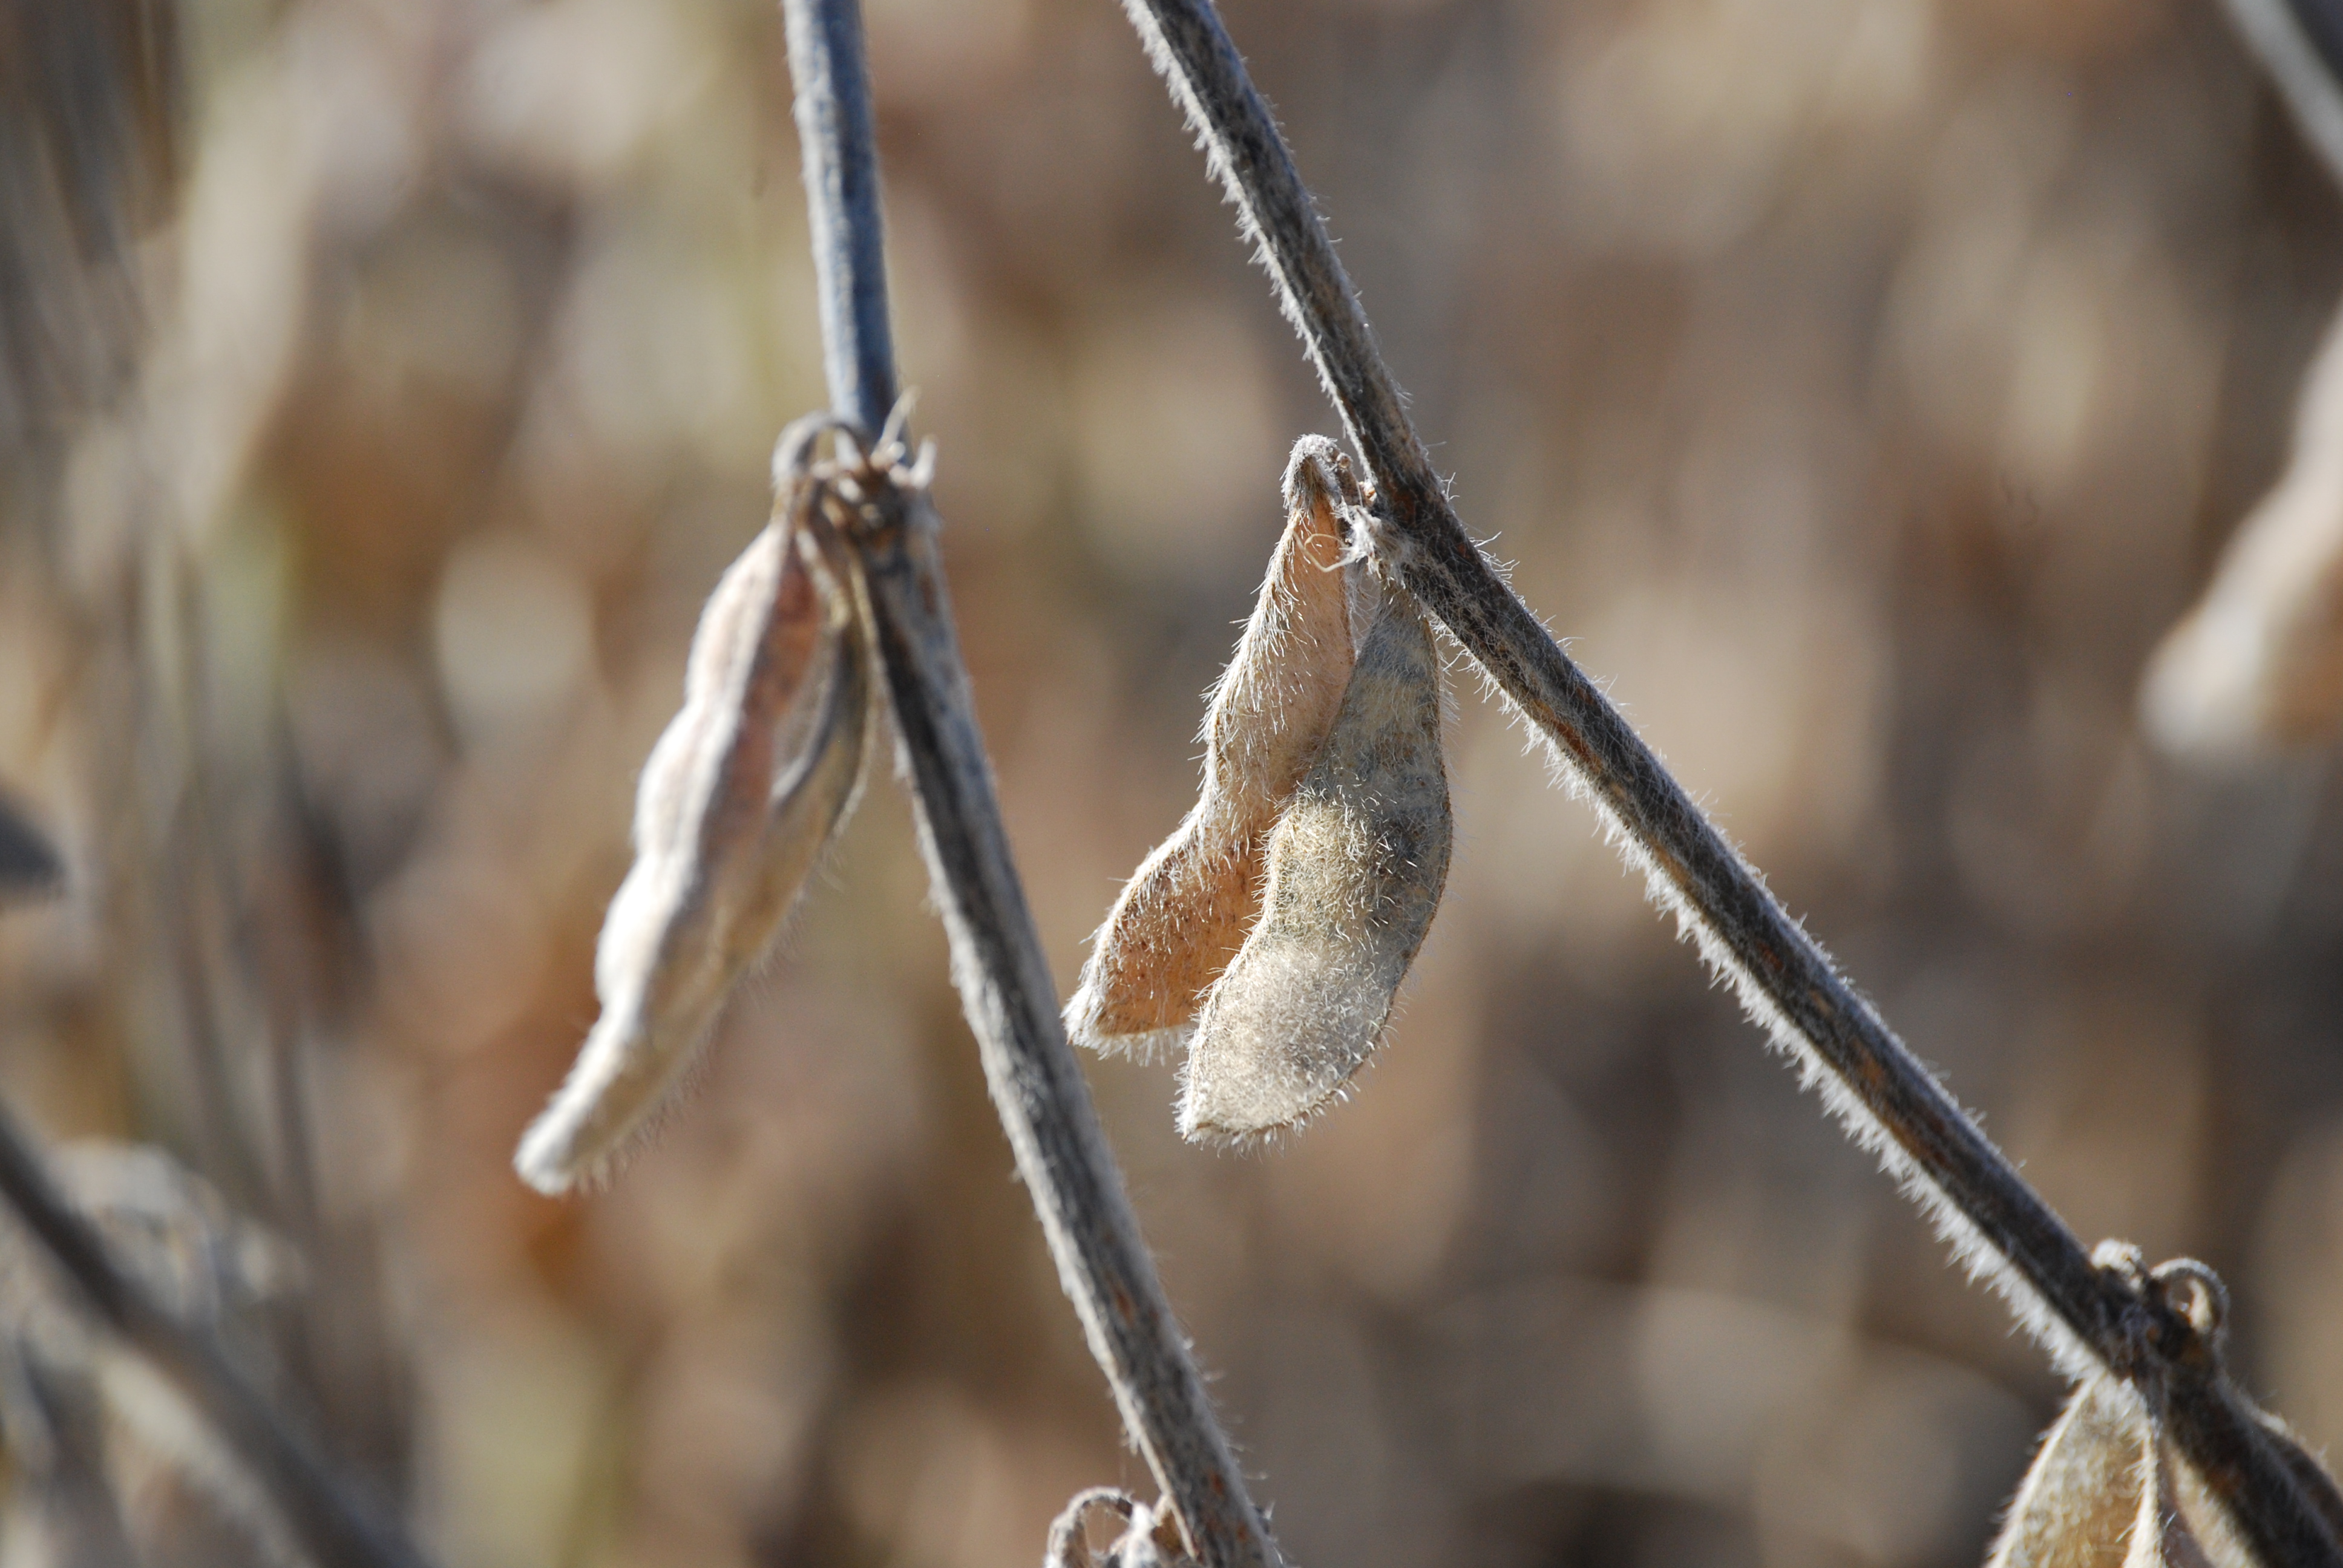 This agronomic photo shows soybeans at harvest.